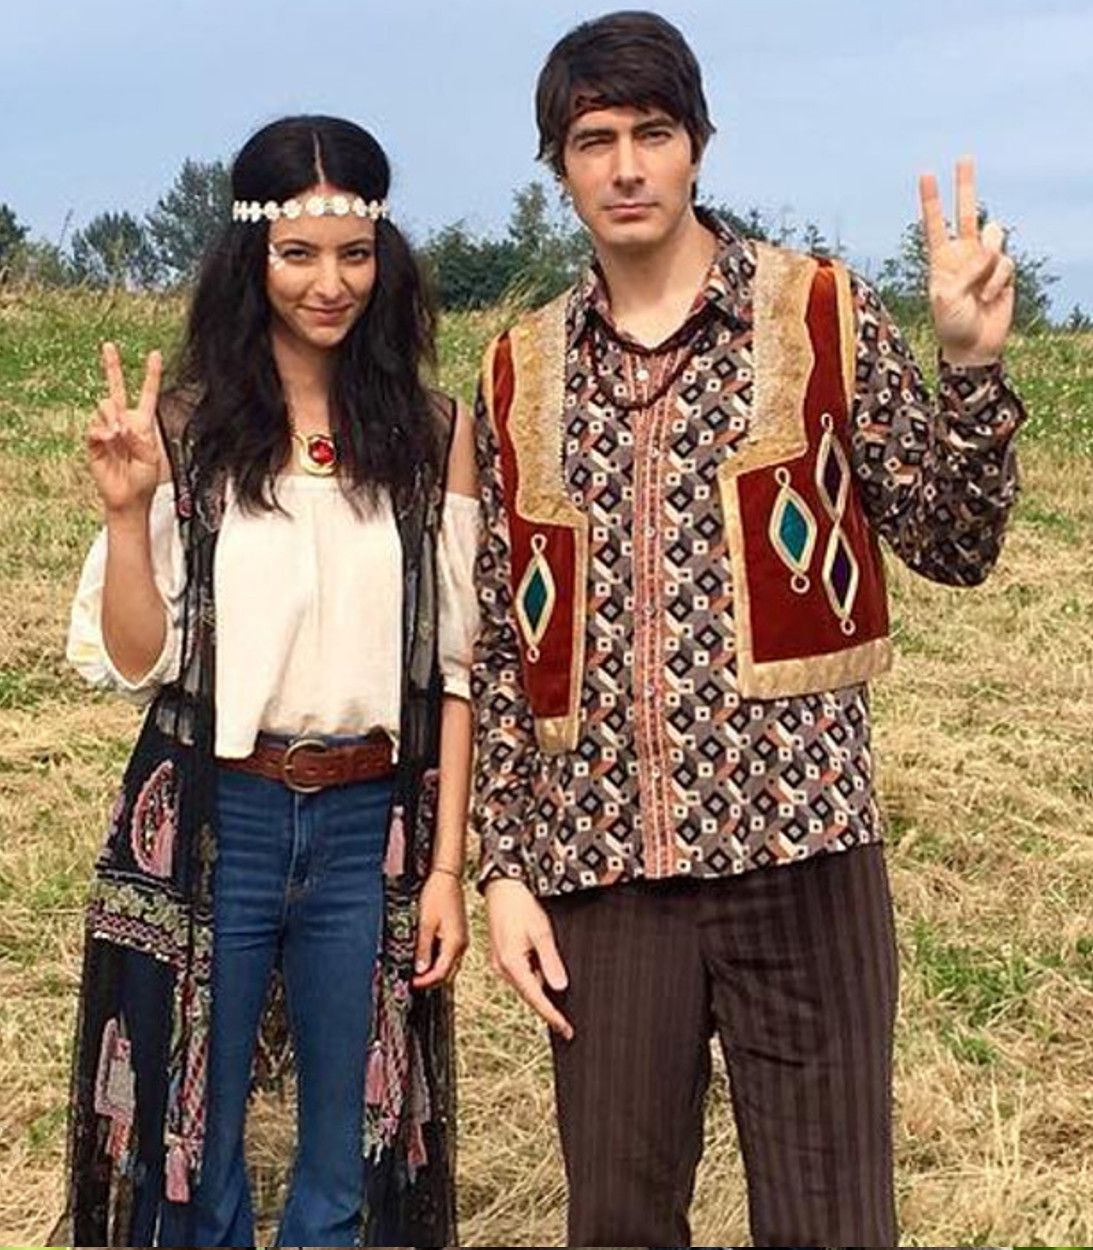 Legends of Tomorrow Zari Tomaz and Ray Palmer Dressed As Hippies At Woodstock vertical